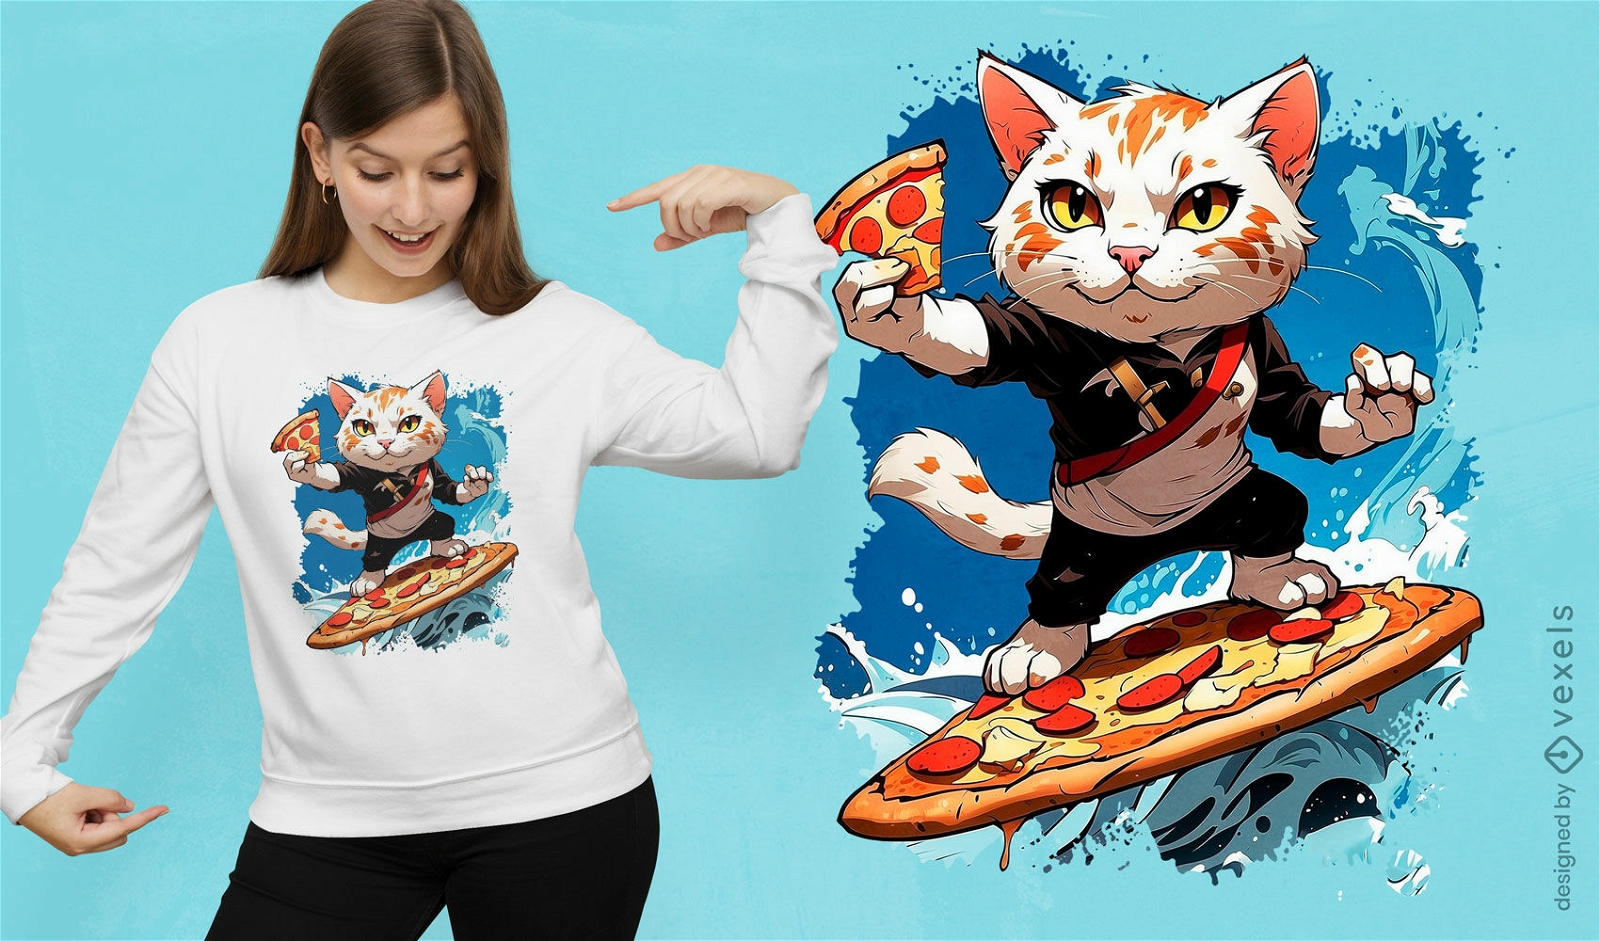 Surfing cat pizza party t-shirt design